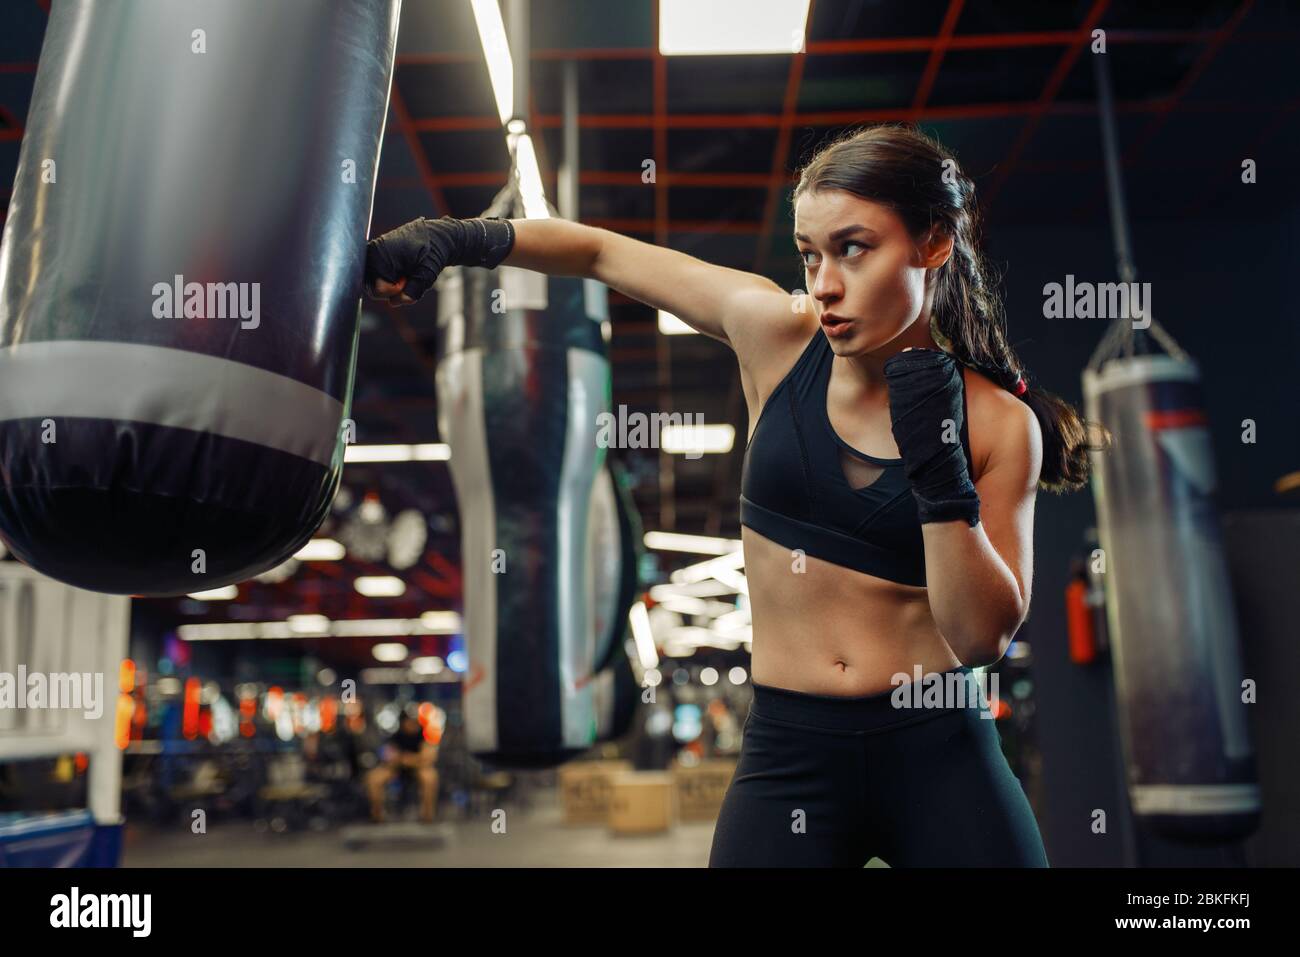 Woman in boxing bandages hits a punching bag, box Stock Photo